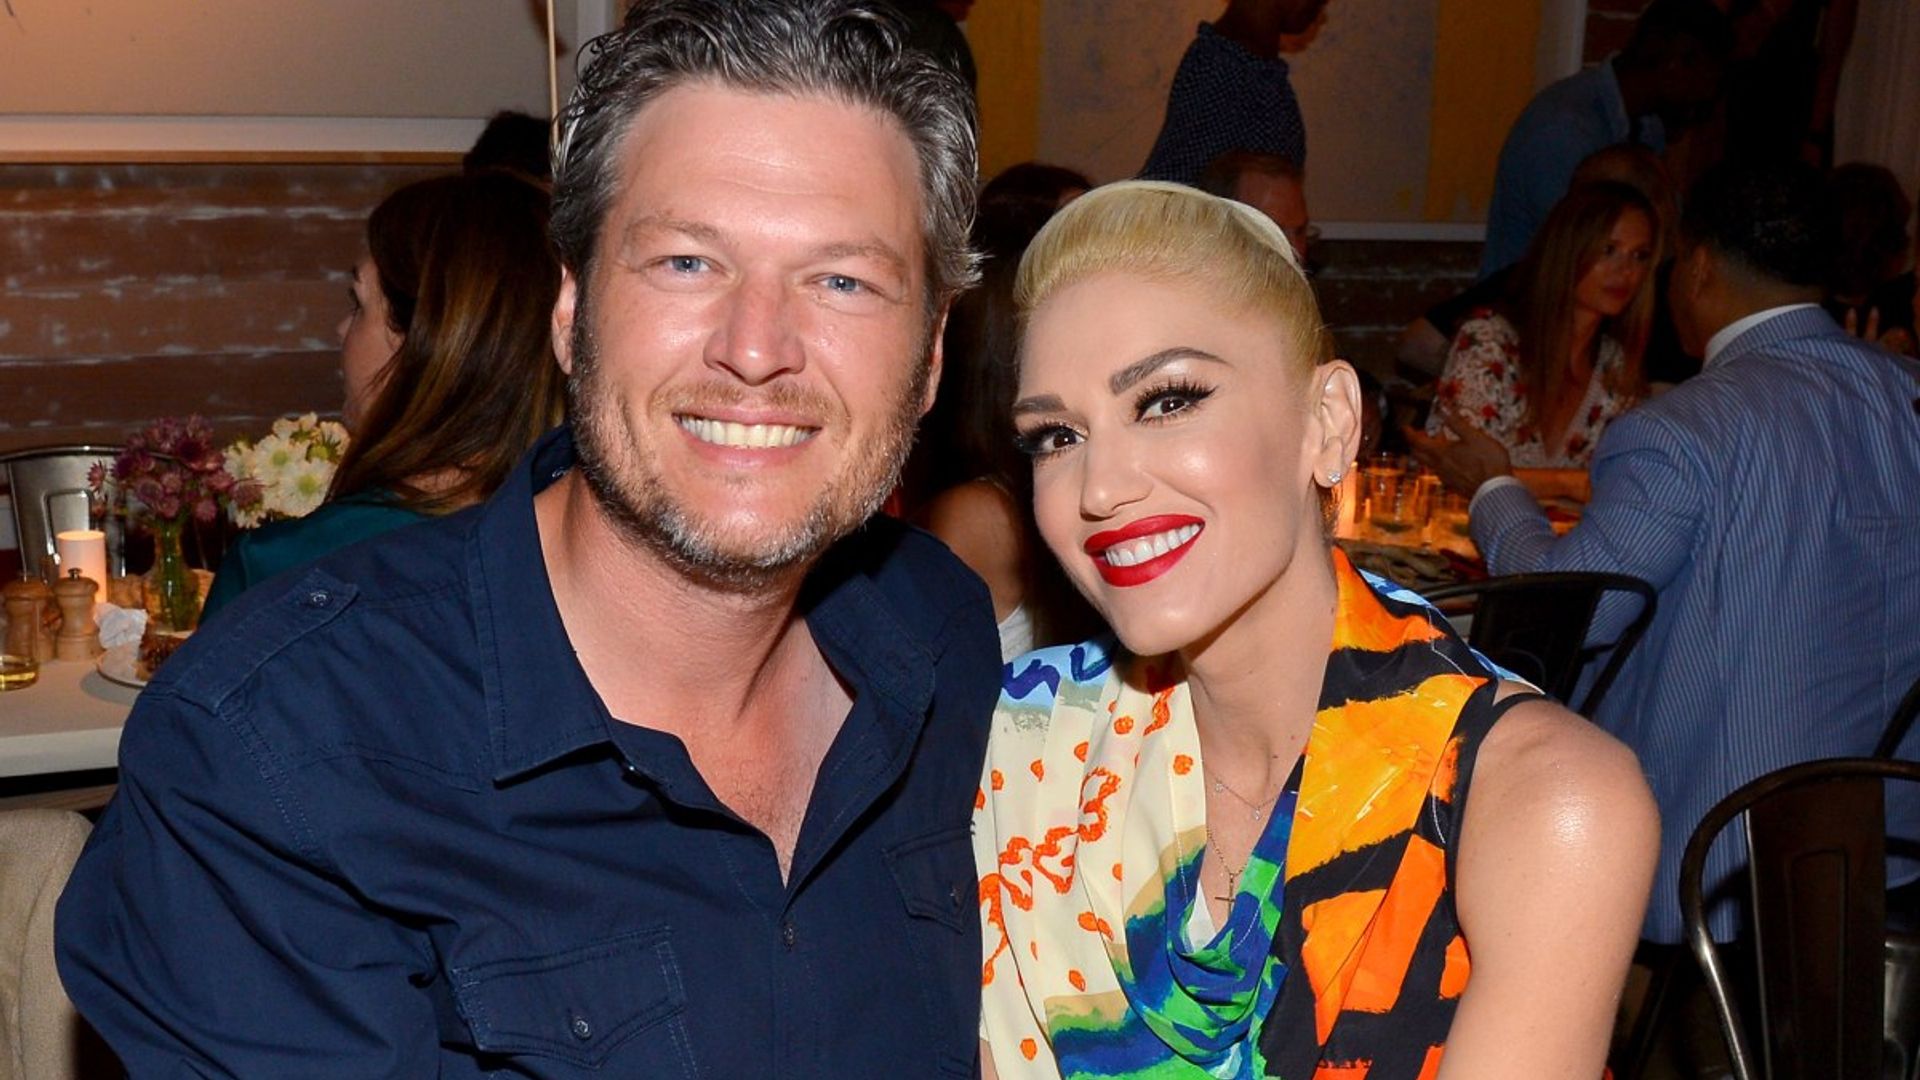 Gwen Stefani’s net worth combined with Blake Shelton’s millions is mind-blowing